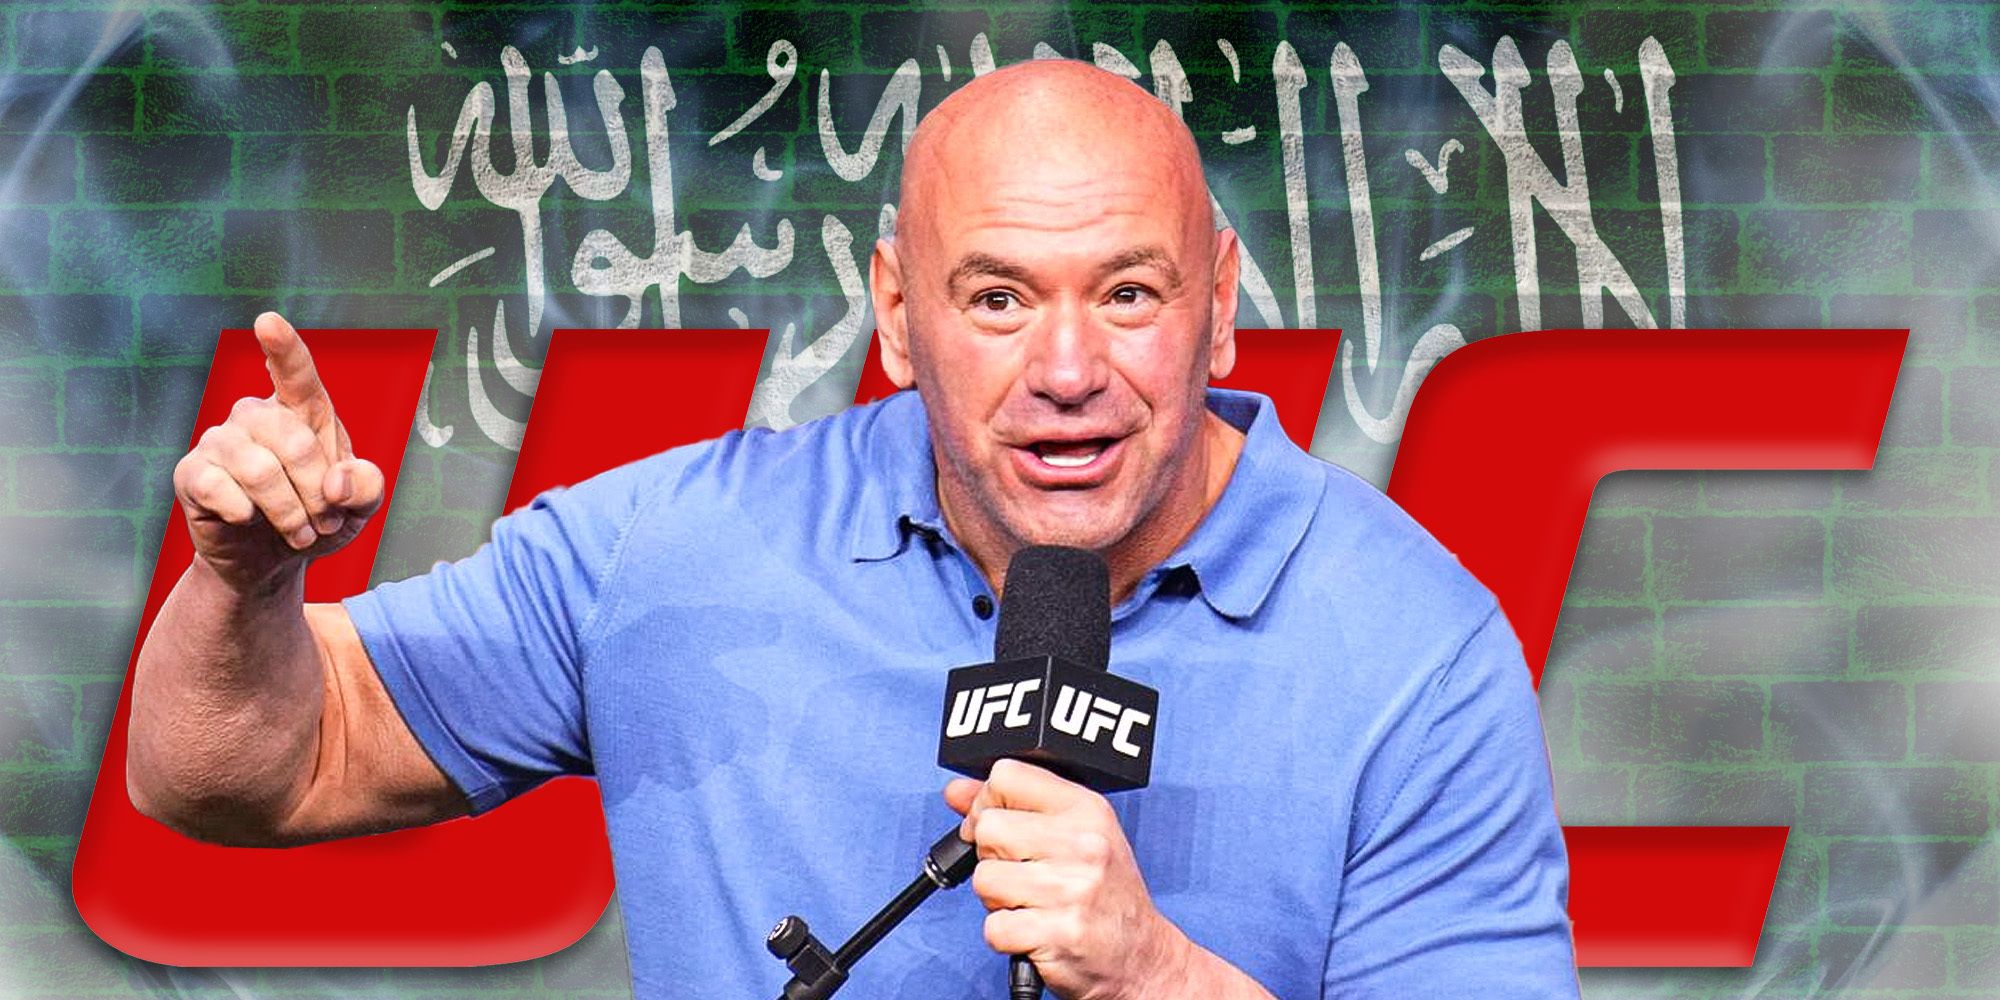 Dana White looking excited